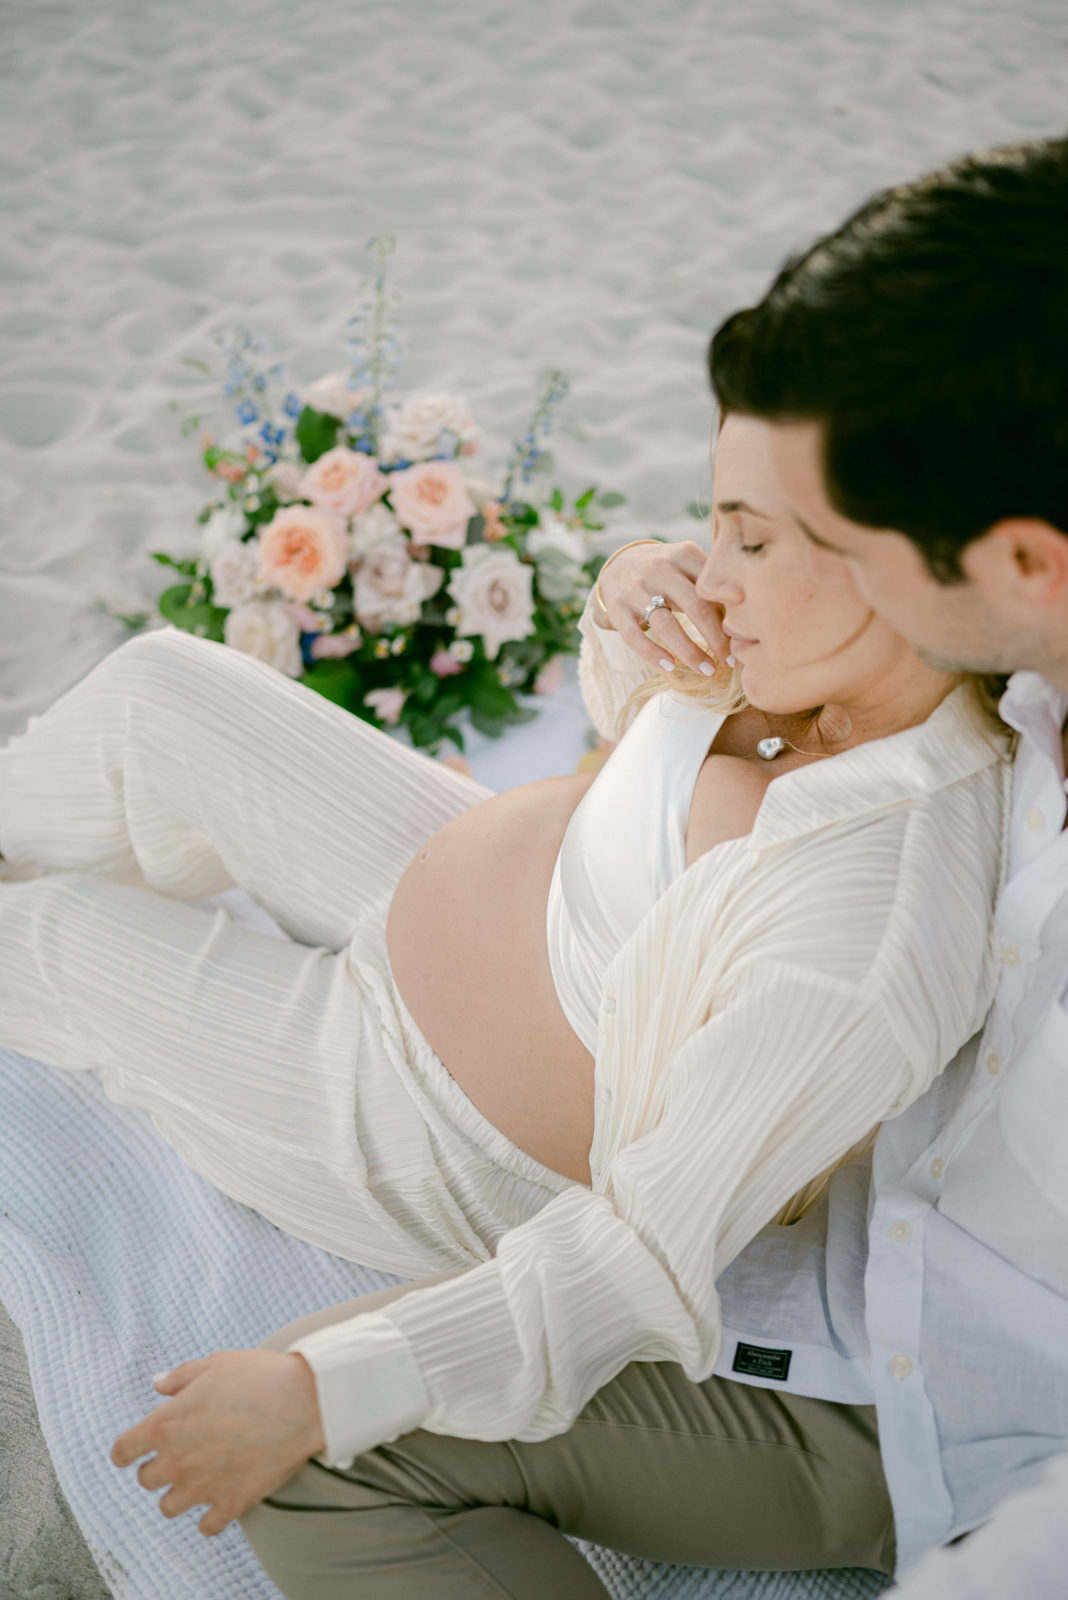 Maternity photoshoot in Key Biscayne on the beach with flowers